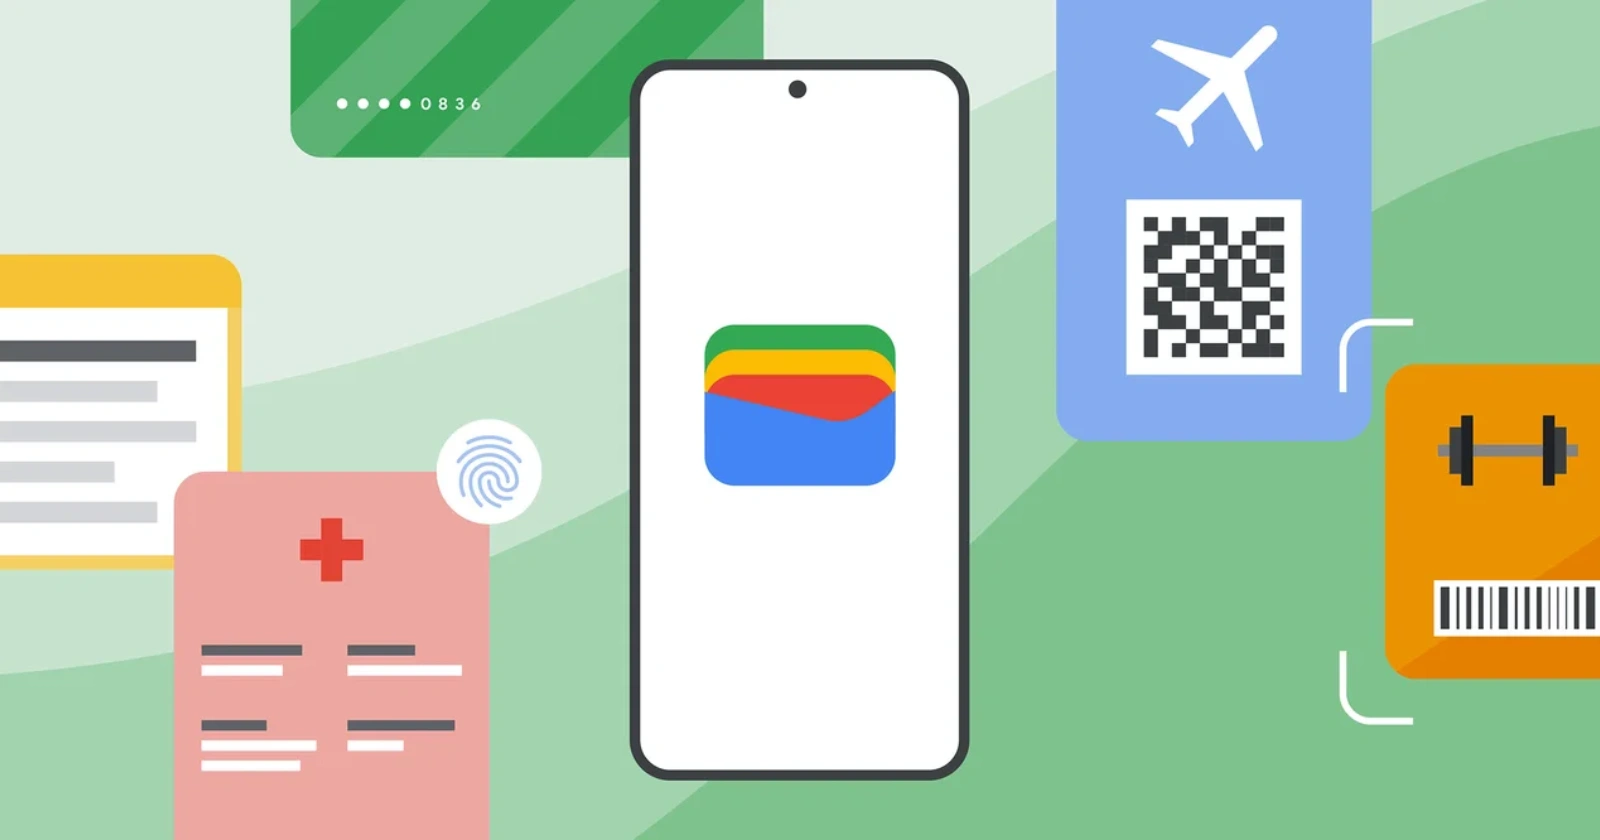 Google Wallet app adds support for 42 new banks in the US